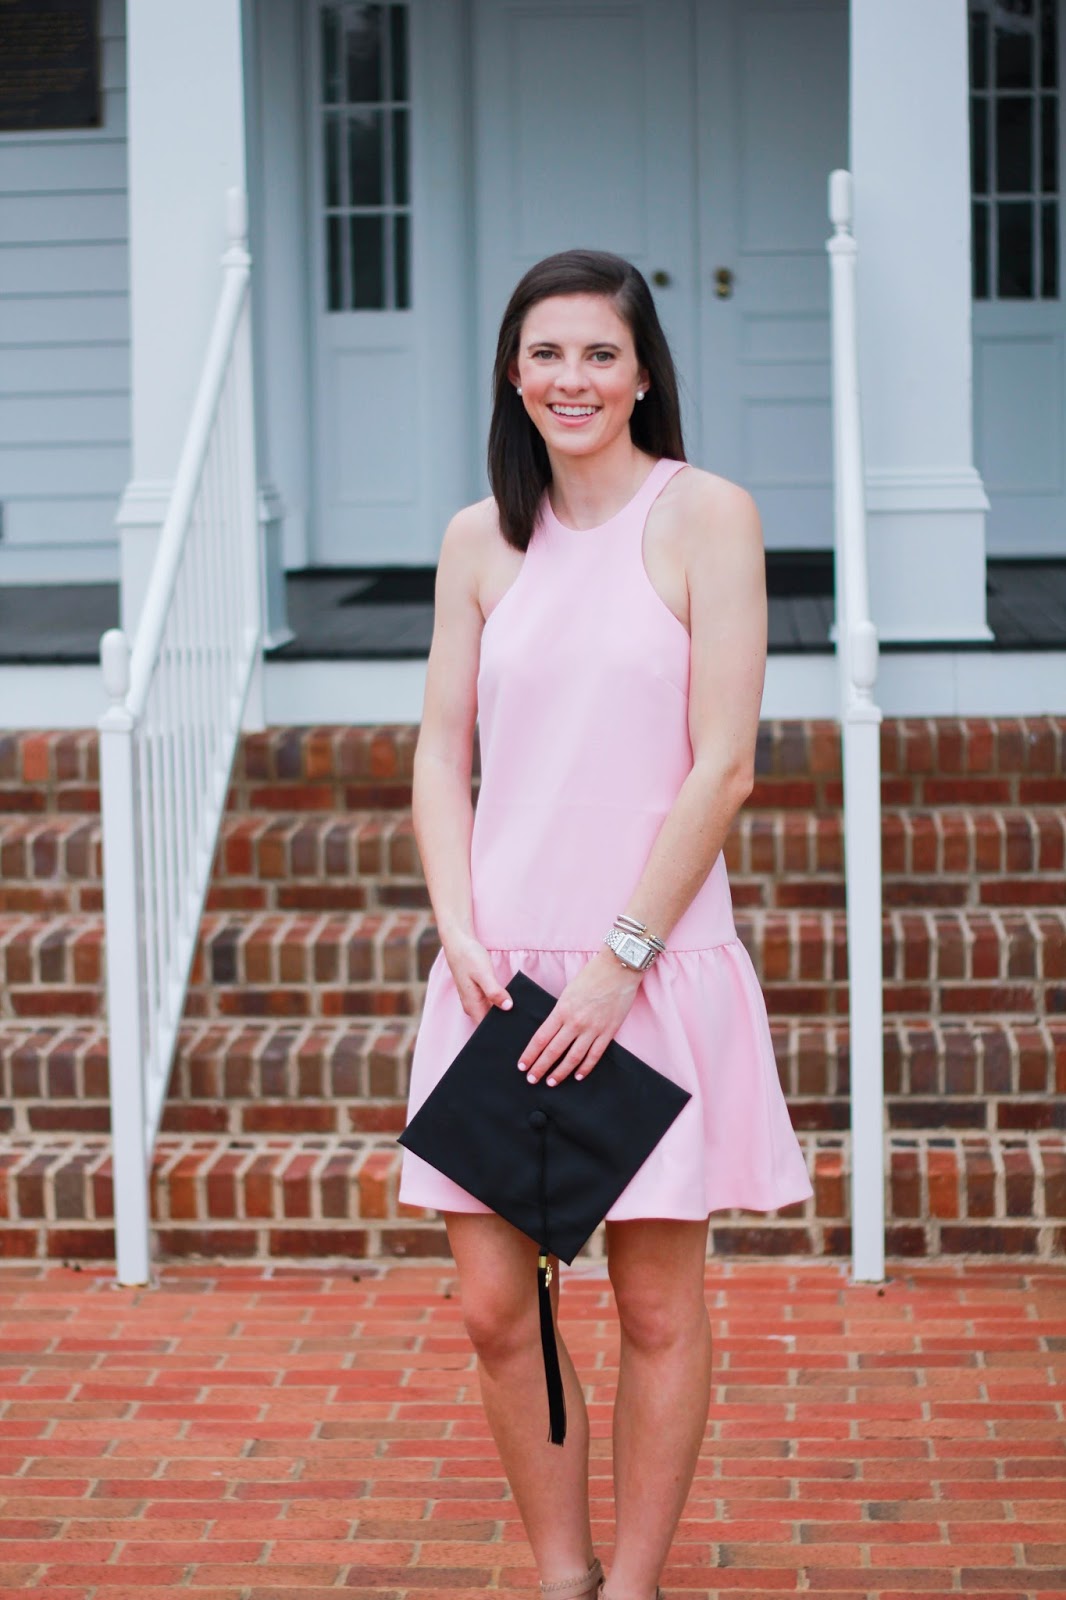 Prep In Your Step What To Wear To Graduation {Dress & Shoe Ideas}